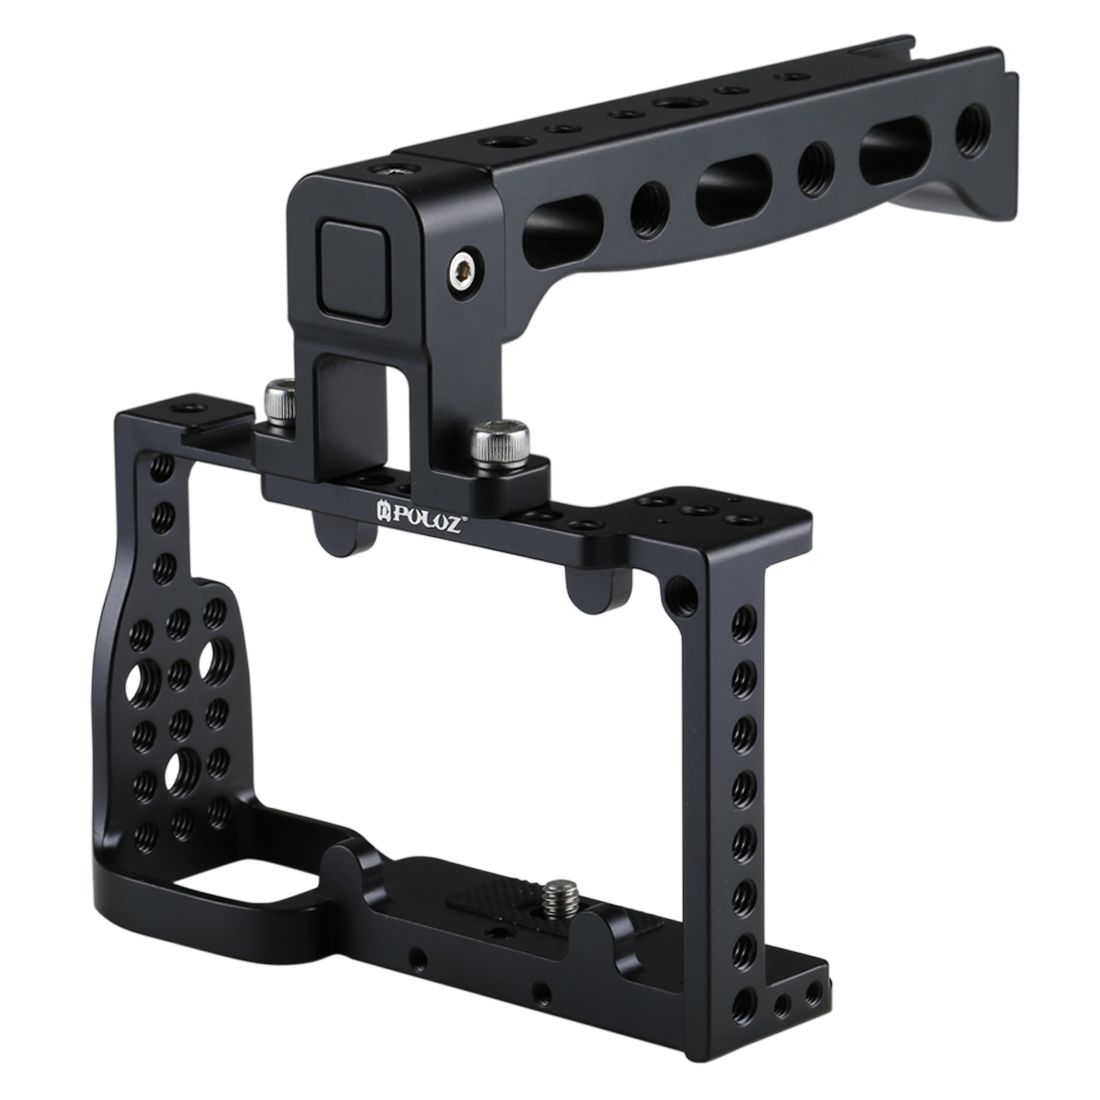 PULUZ-PU3020B-Aluminum-Alloy-Video-Camera-Cage-Protector-Handle-Stabilizer-for-Sony-A6300-A6000-1240242